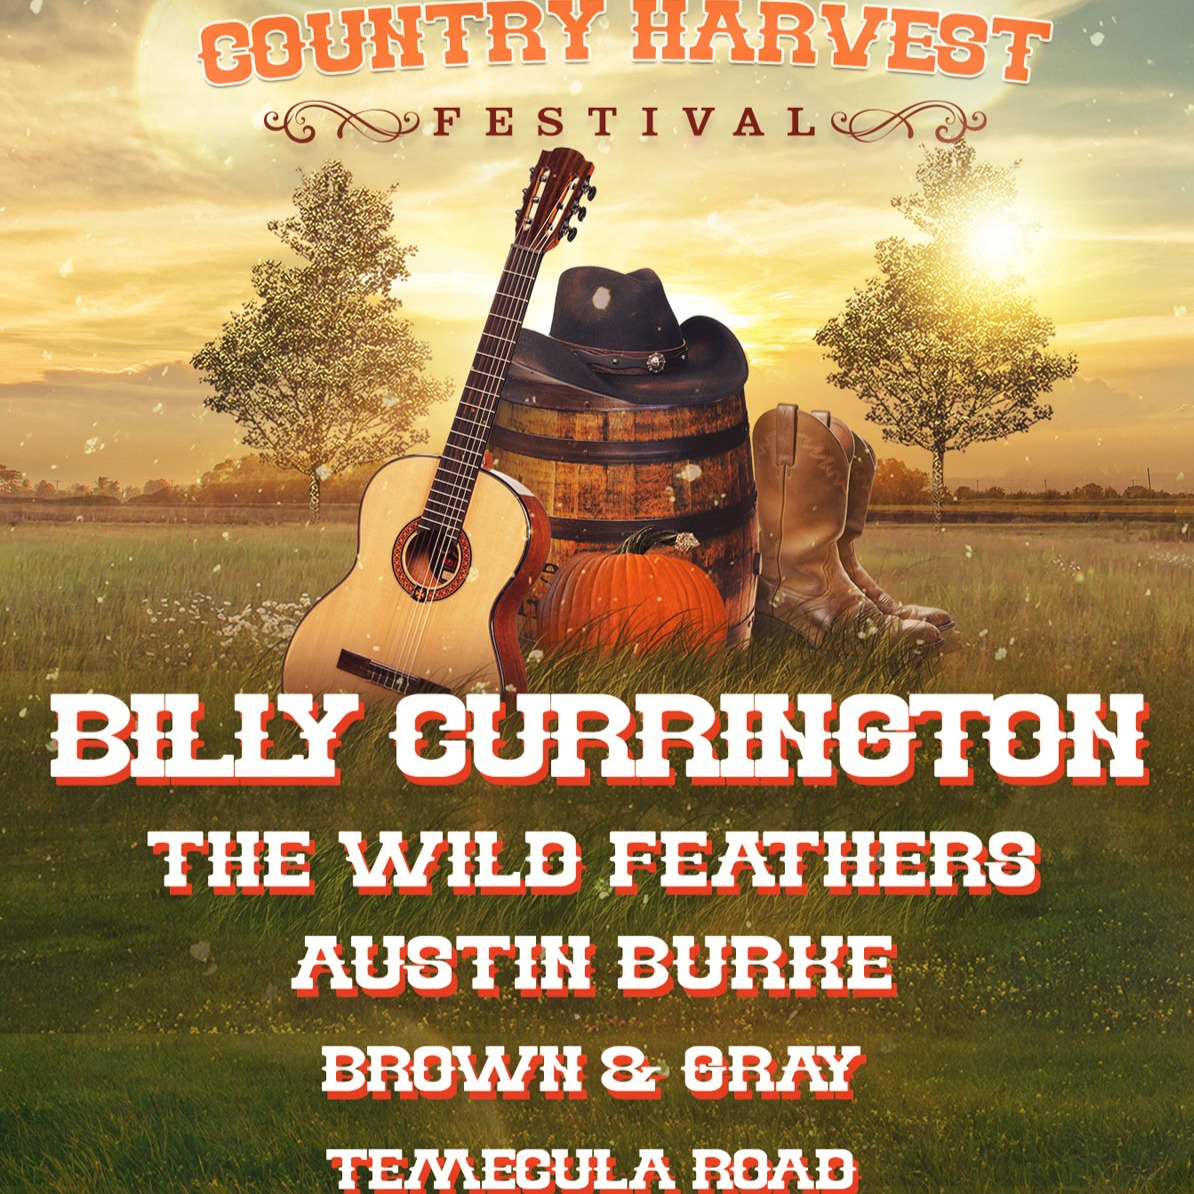 Country Harvest Festival Featuring Billy Currington | At Silverado | Events 